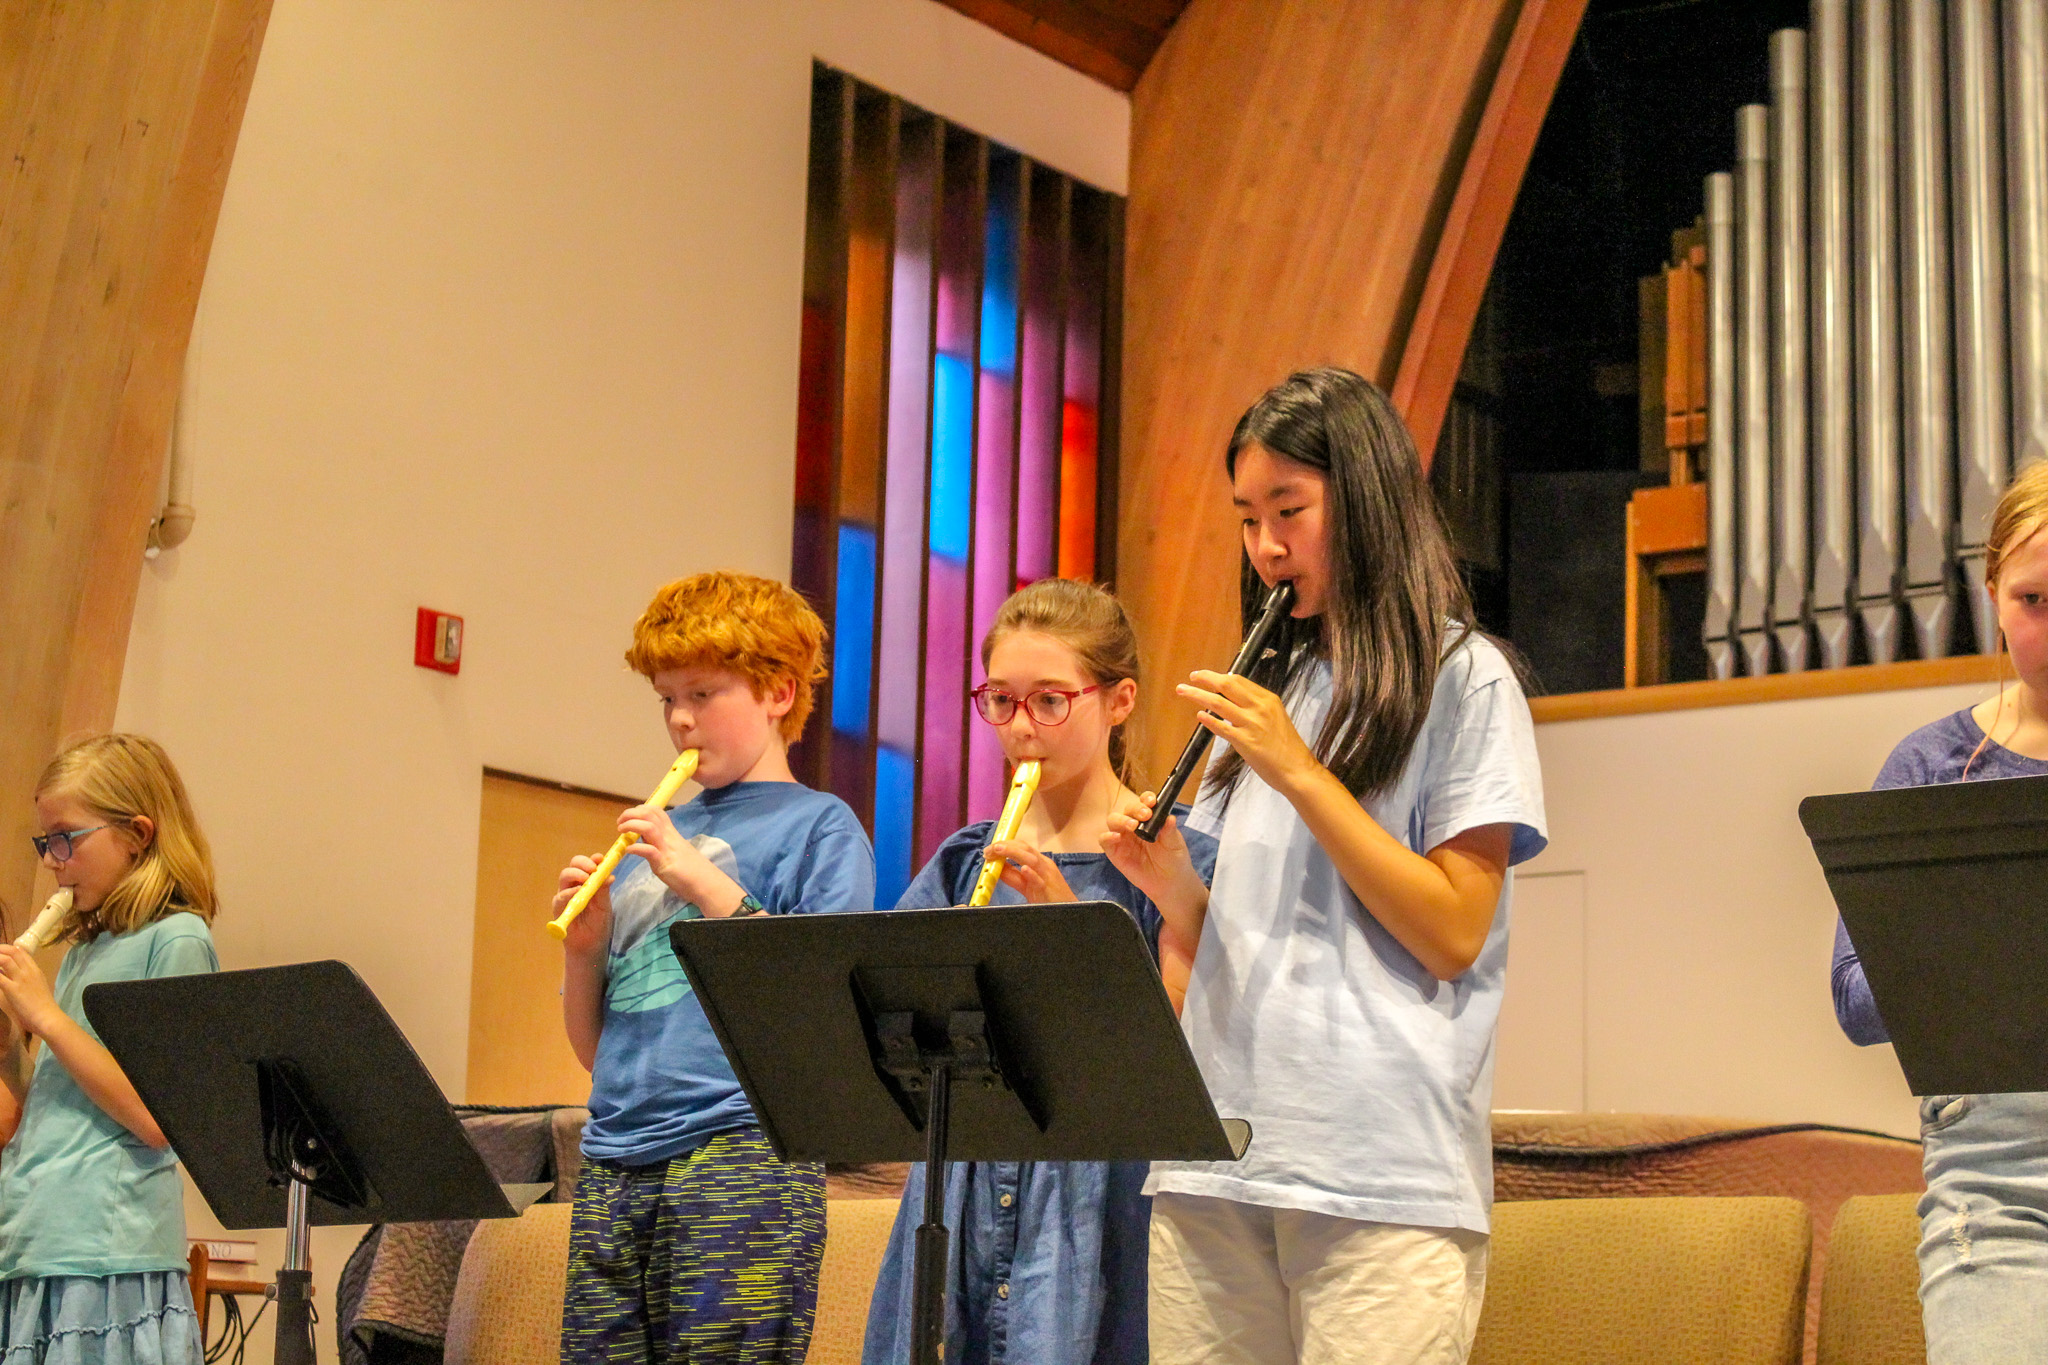 Elementary students playing recorders while performing at a school concert